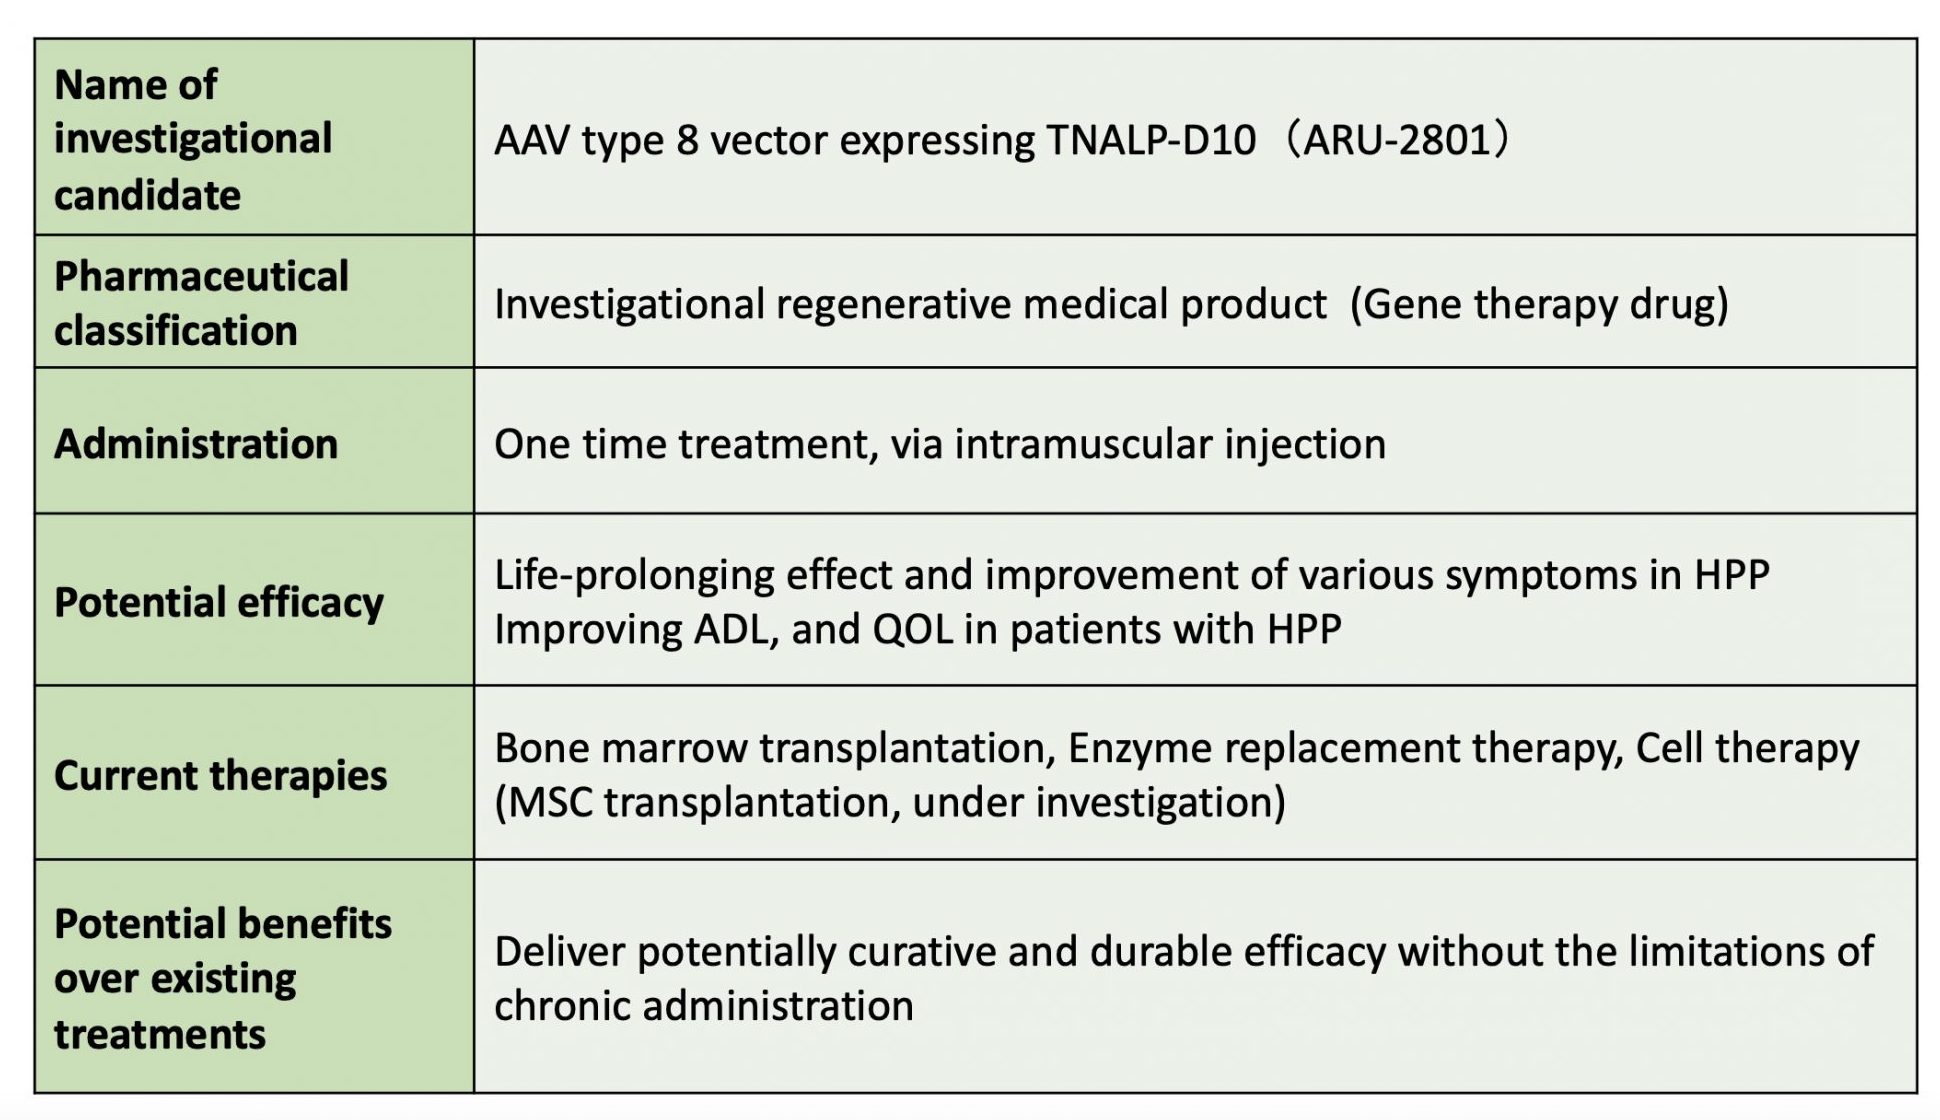 Table 2. TPP (Target Product Profile) of ARU-2801